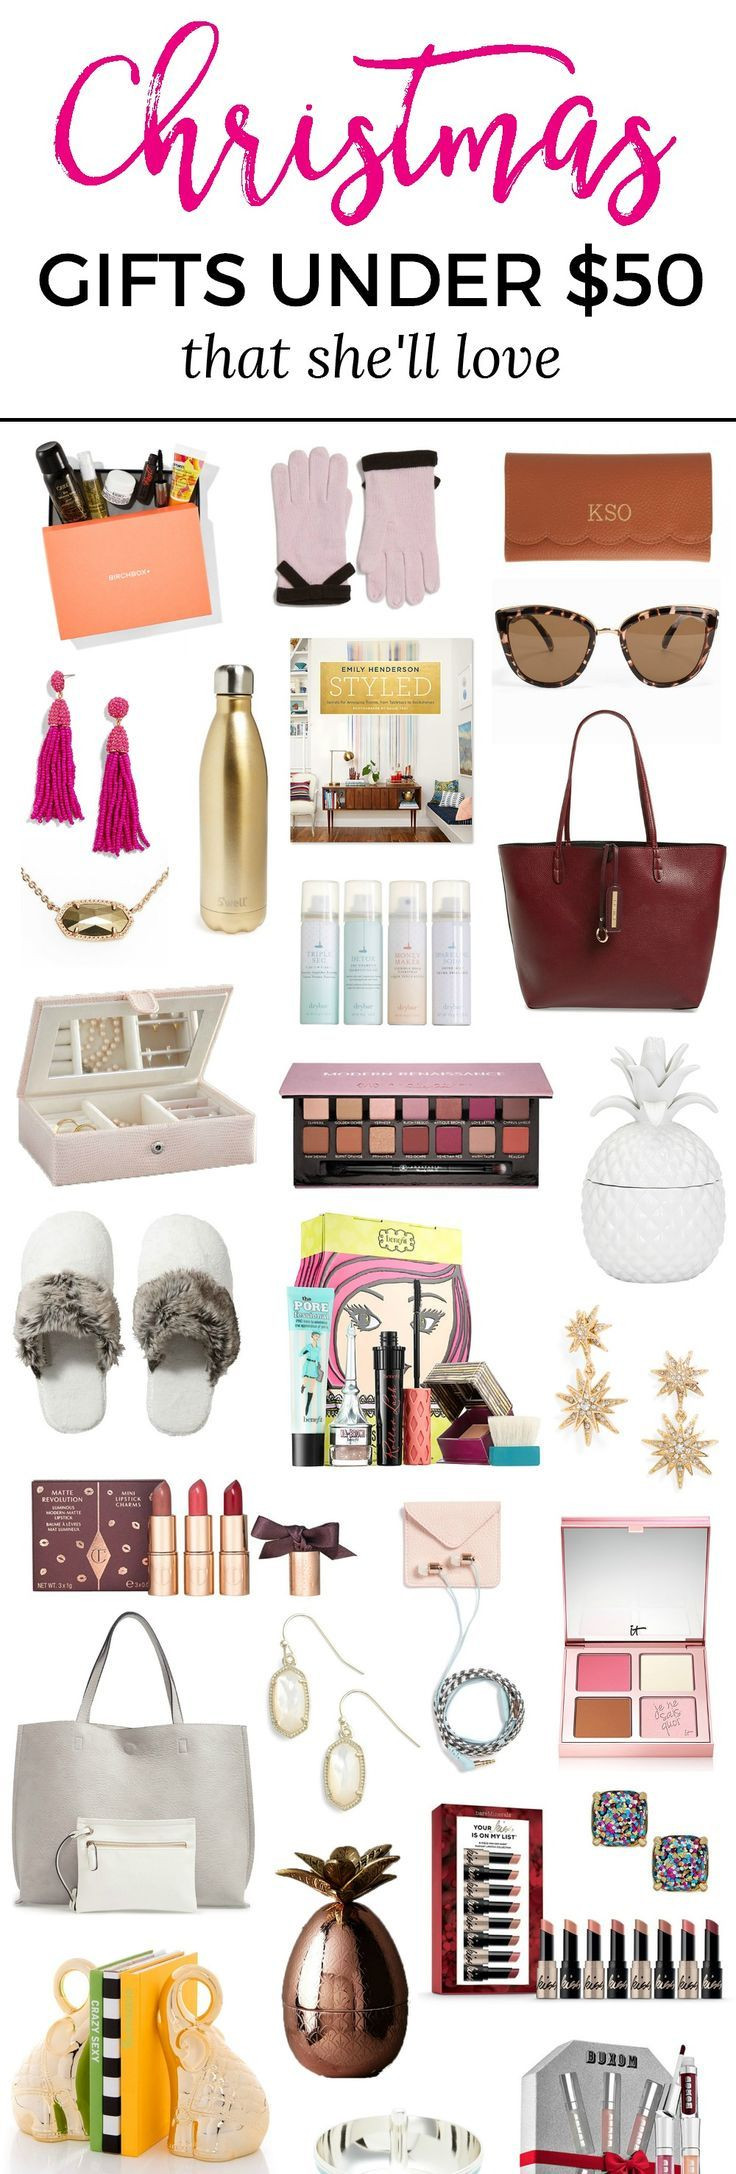 Birthday Gifts For Women
 The best Christmas t ideas for women under $50 You won